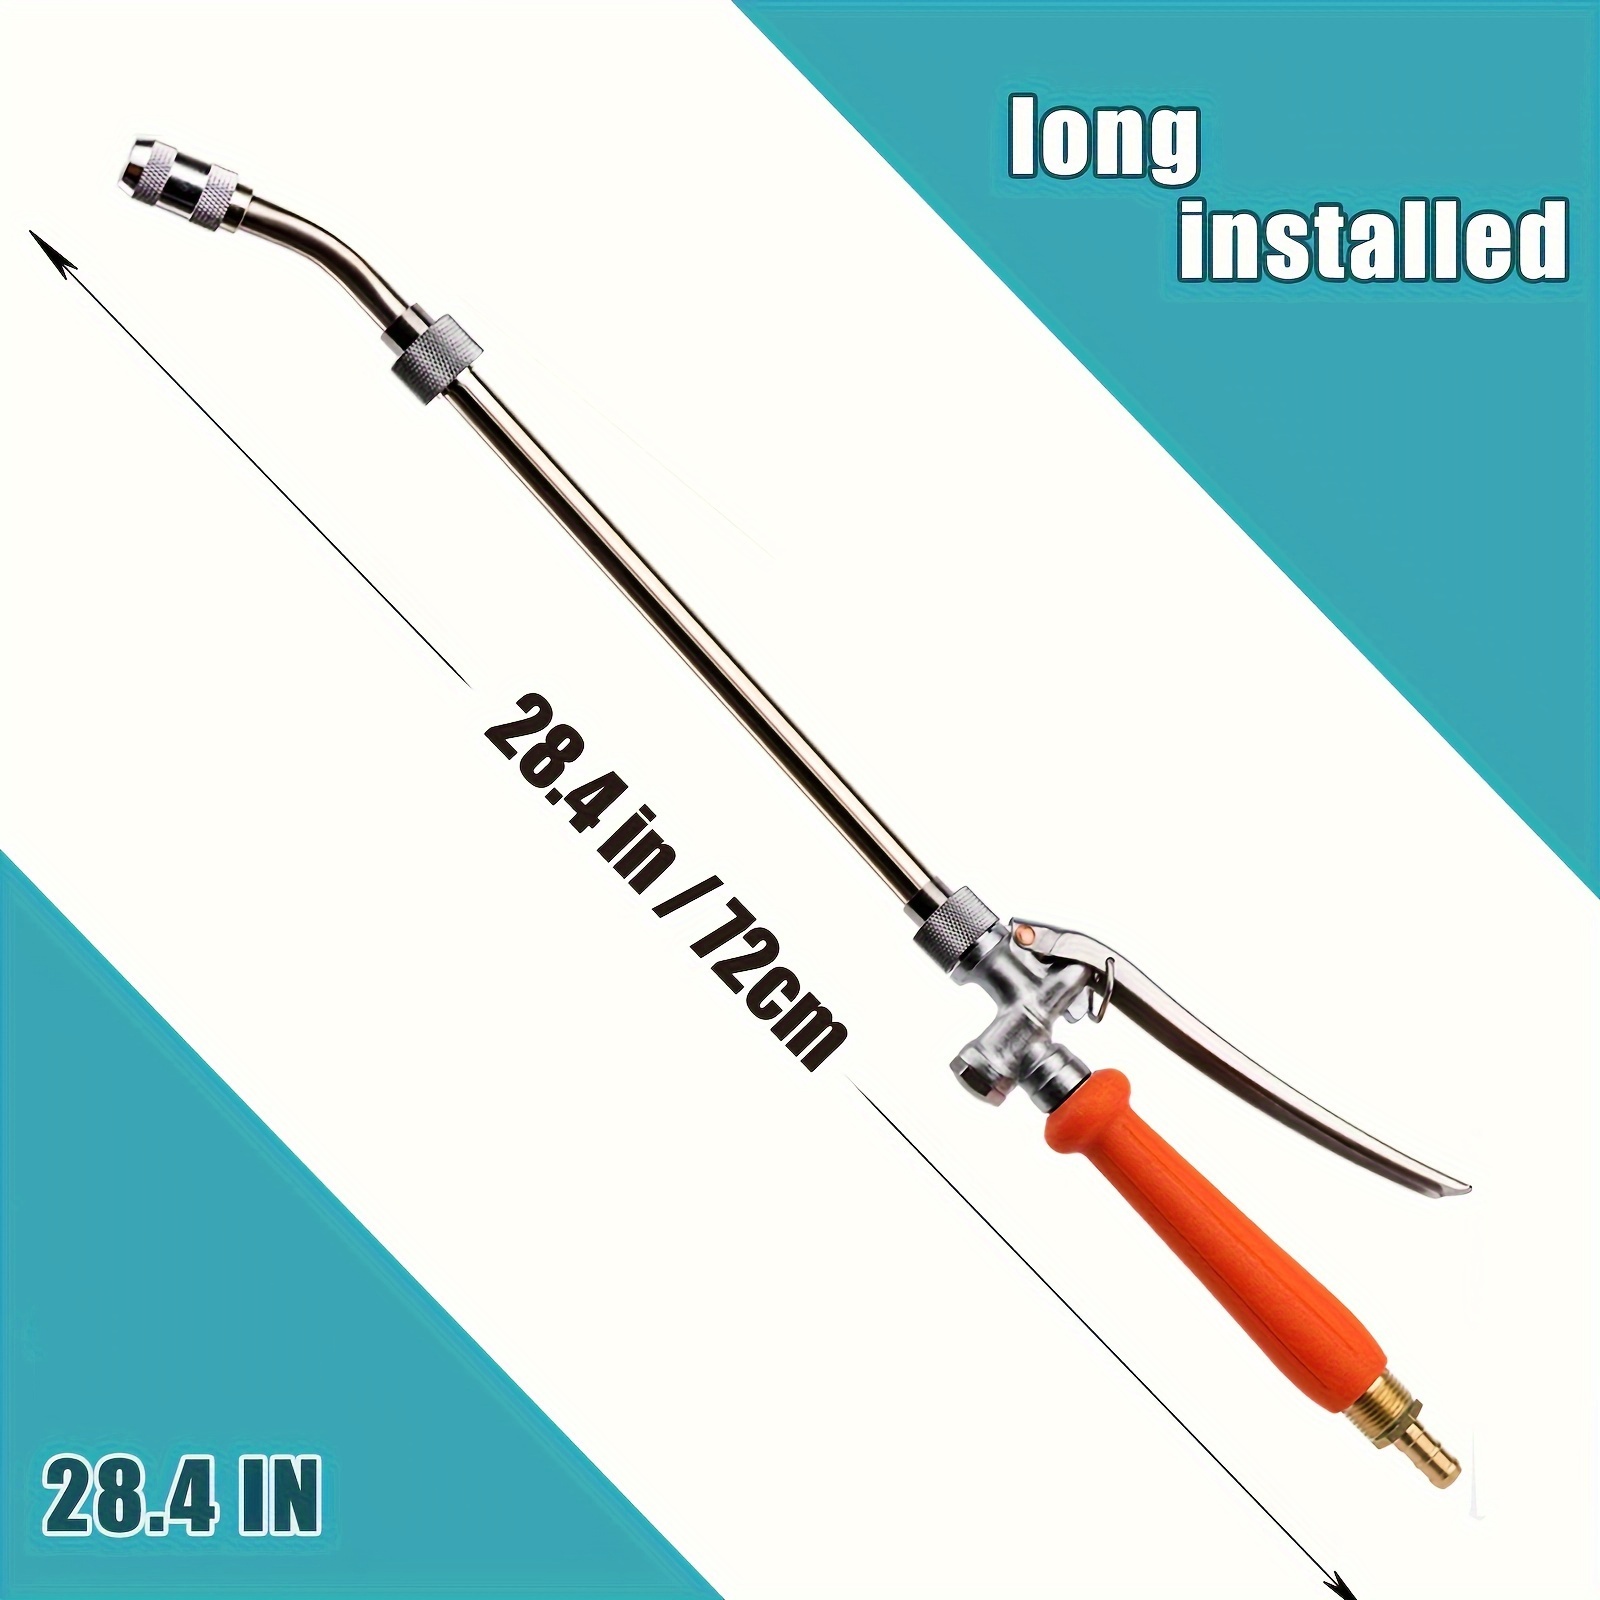 

29" All-metal Sprayer Wand With Adjustable Nozzle & Locking Handle - Fits 1/2", 3/8", 1/4" Hoses, Includes Brass Barb & Quick Connector